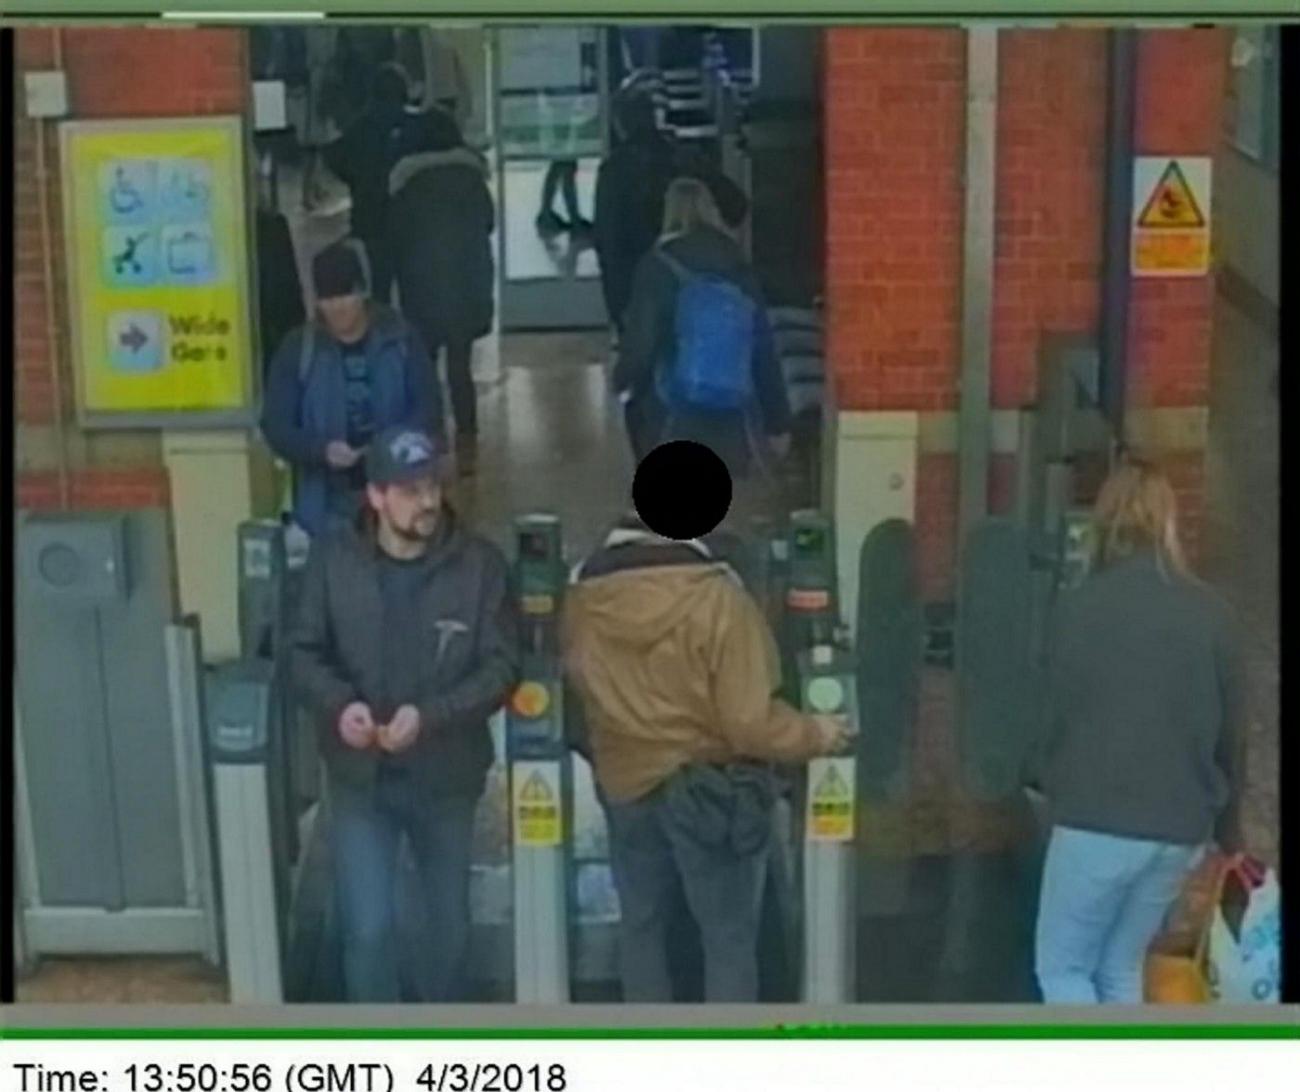 Police released a CCTV image of the assassins returning to Salisbury railway station at 13.50